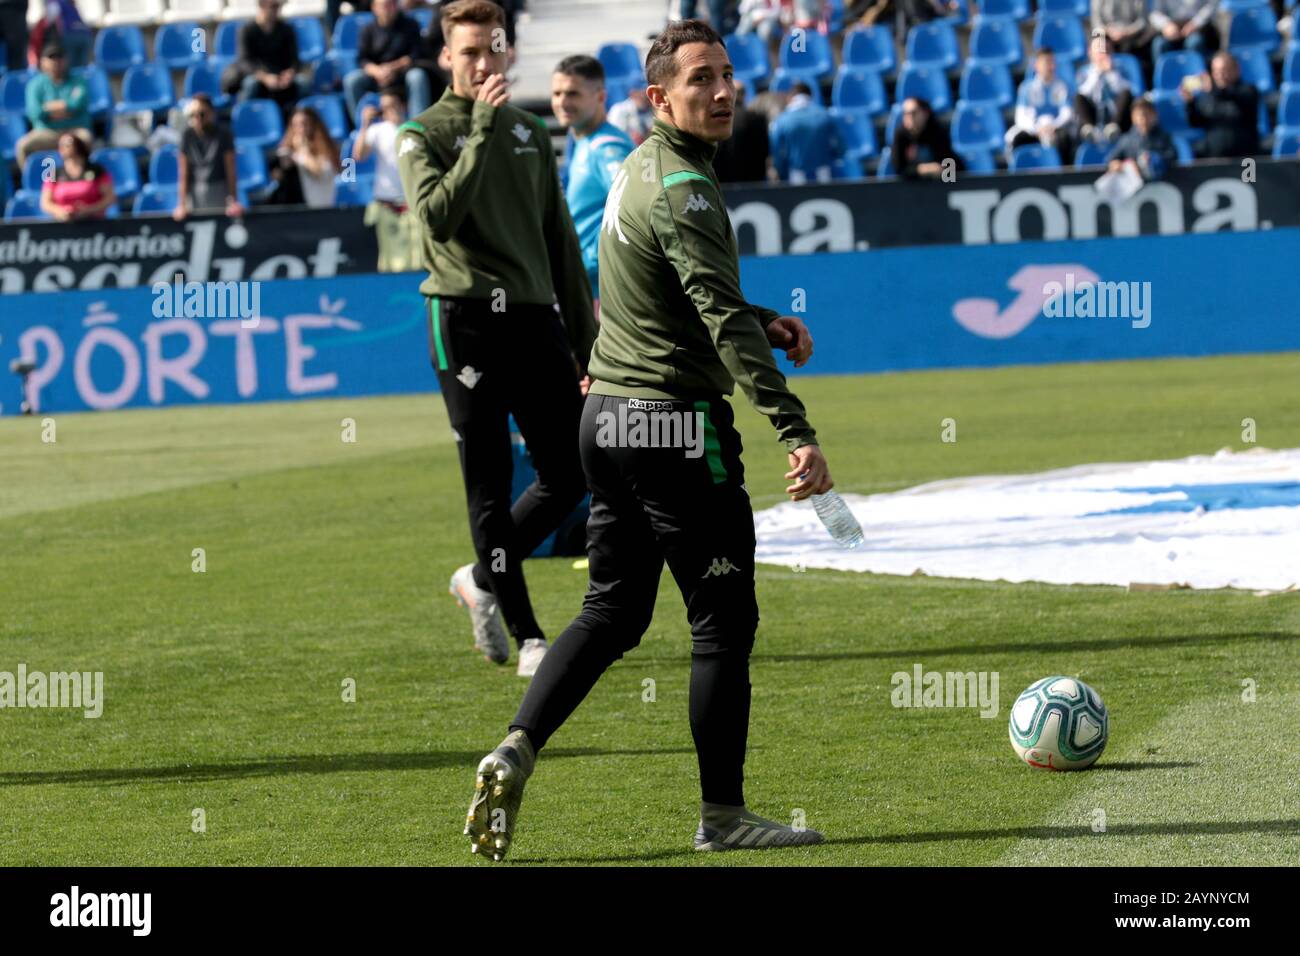 Leganes, Spain. 16th Feb, 2020. Soccer match 24 La Liga, Leganes against Betis held at the Butrarque Stadium in Leganes, Madrid. Andres Guardado Betis player mexican. Final score 0-0 Photo: Juan Carlos Rojas/Picture Alliance | usage worldwide Credit: dpa picture alliance/Alamy Live News Stock Photo